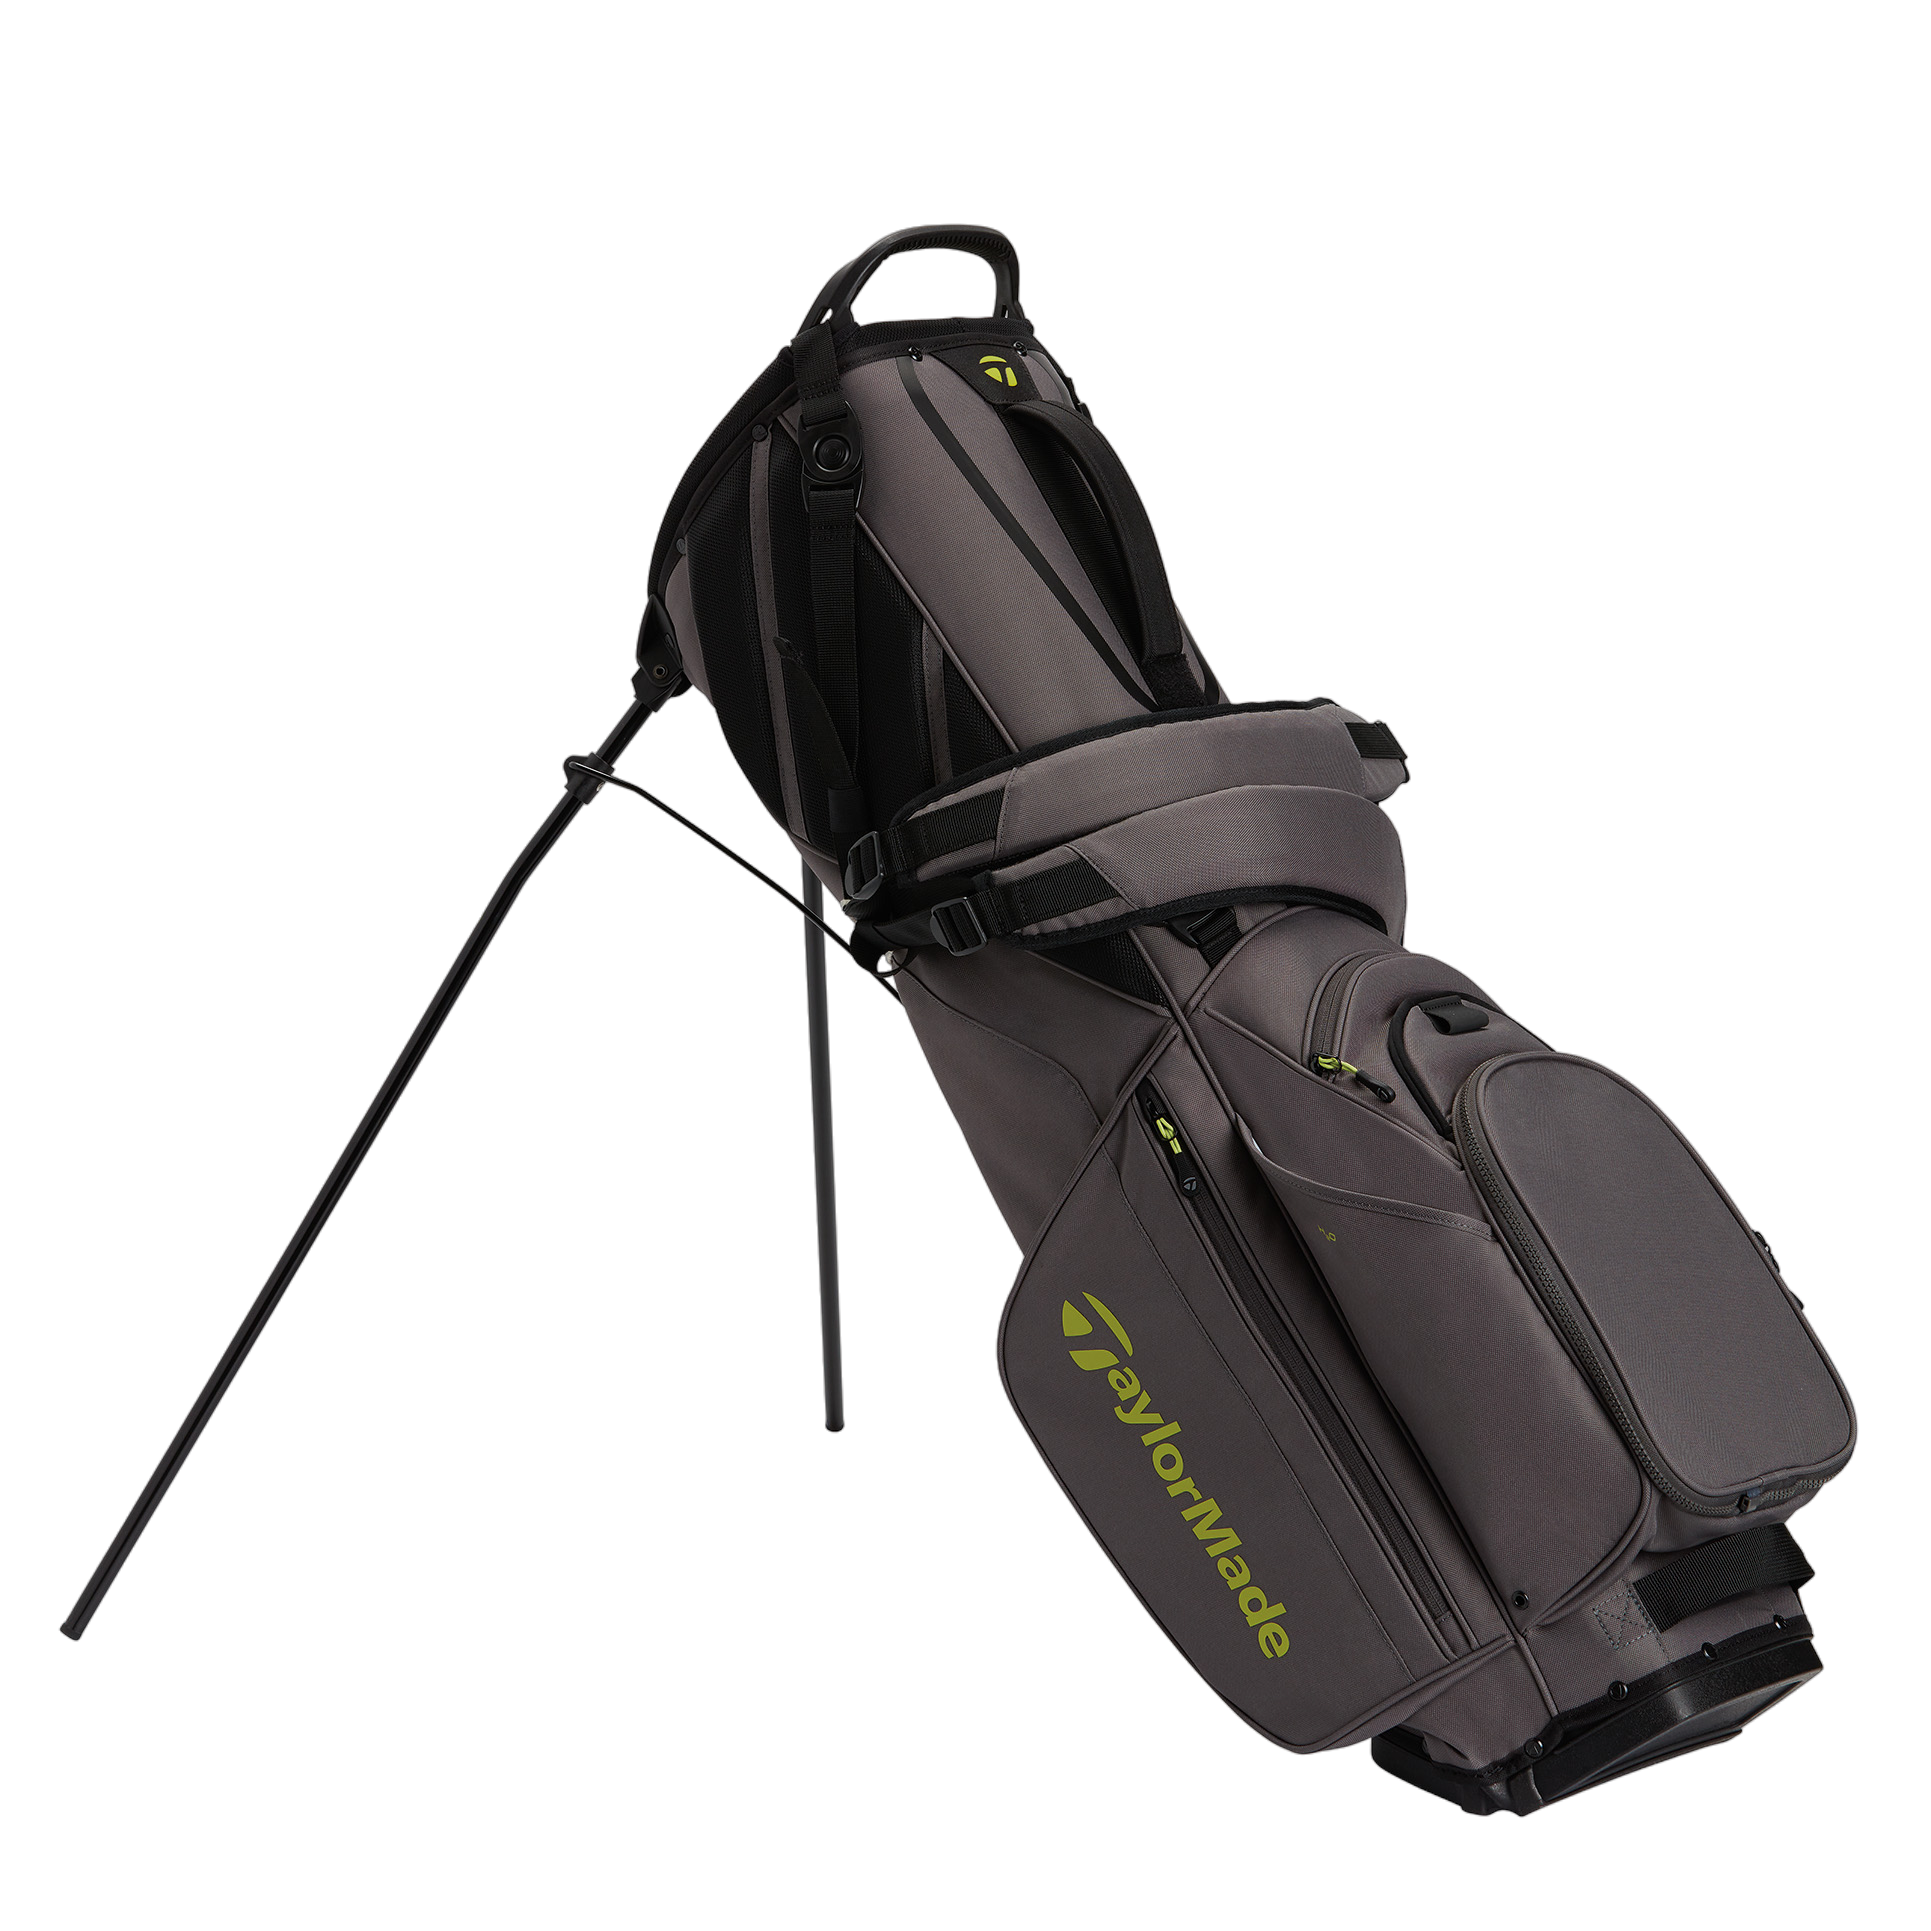 FlexTech Crossover 2023 Stand Bag